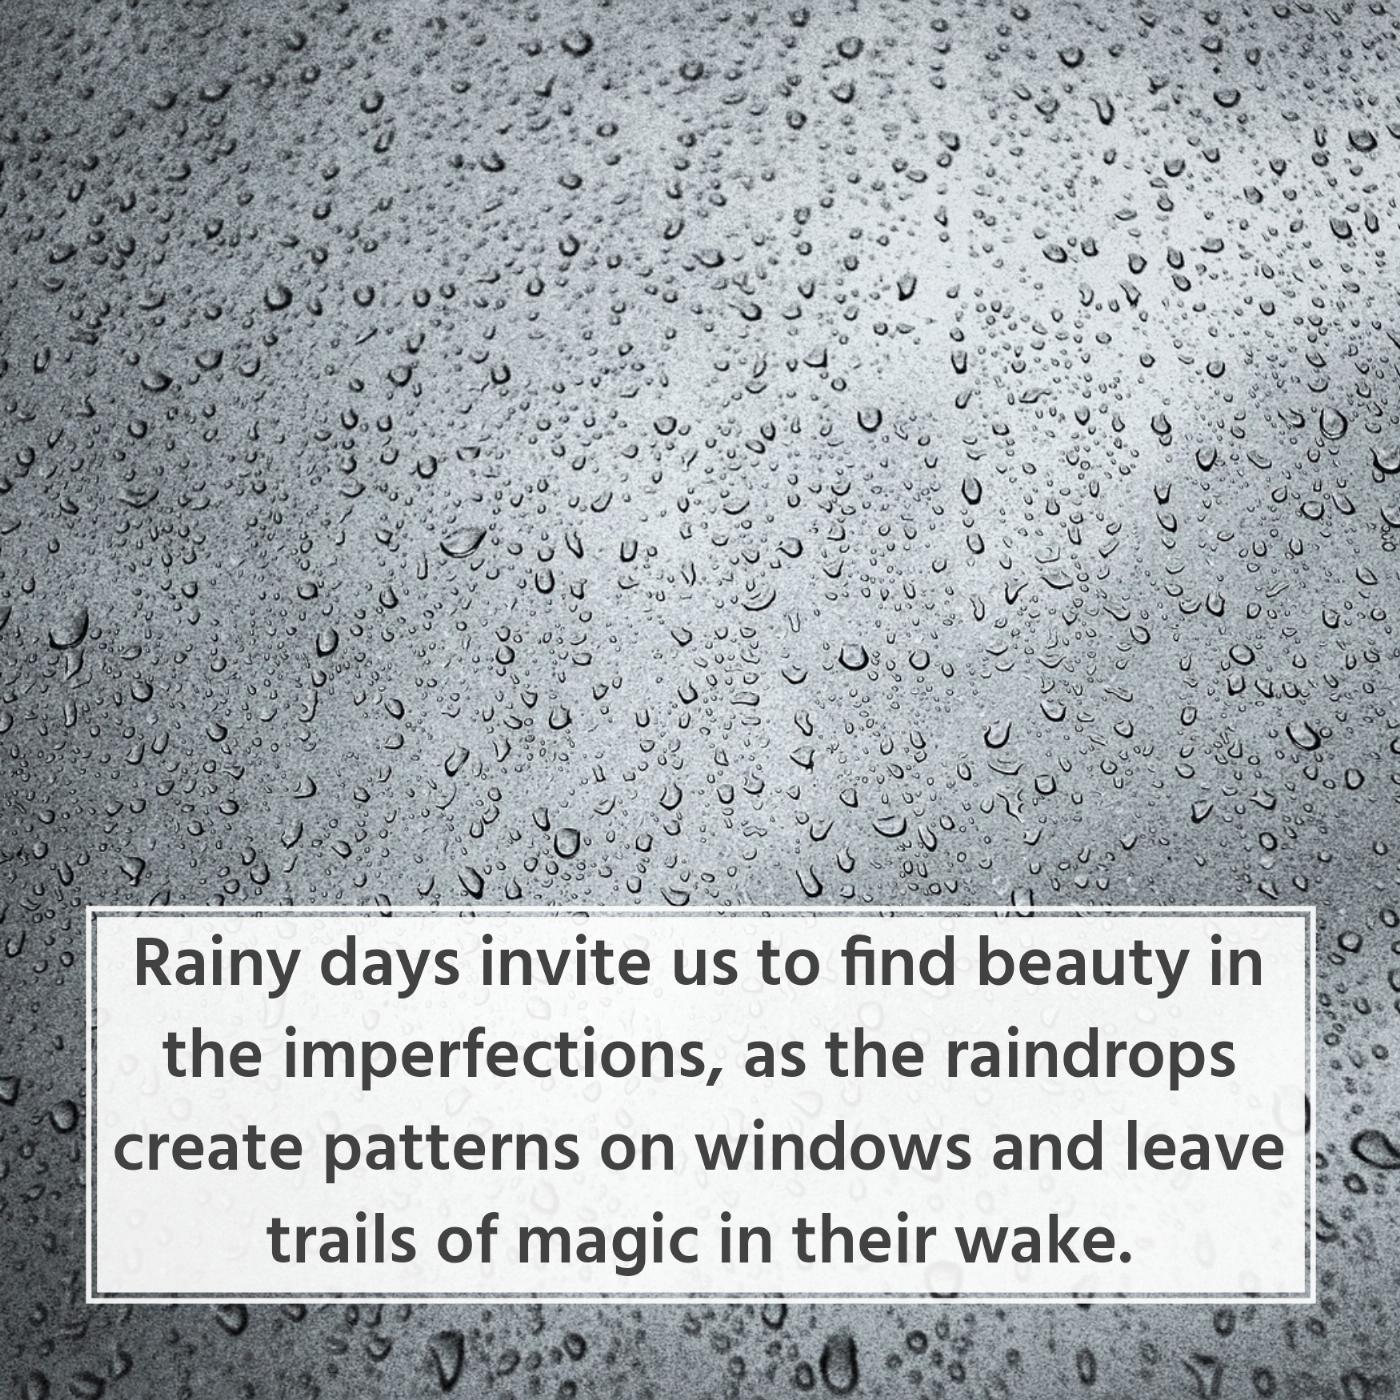 Rainy days invite us to find beauty in the imperfections